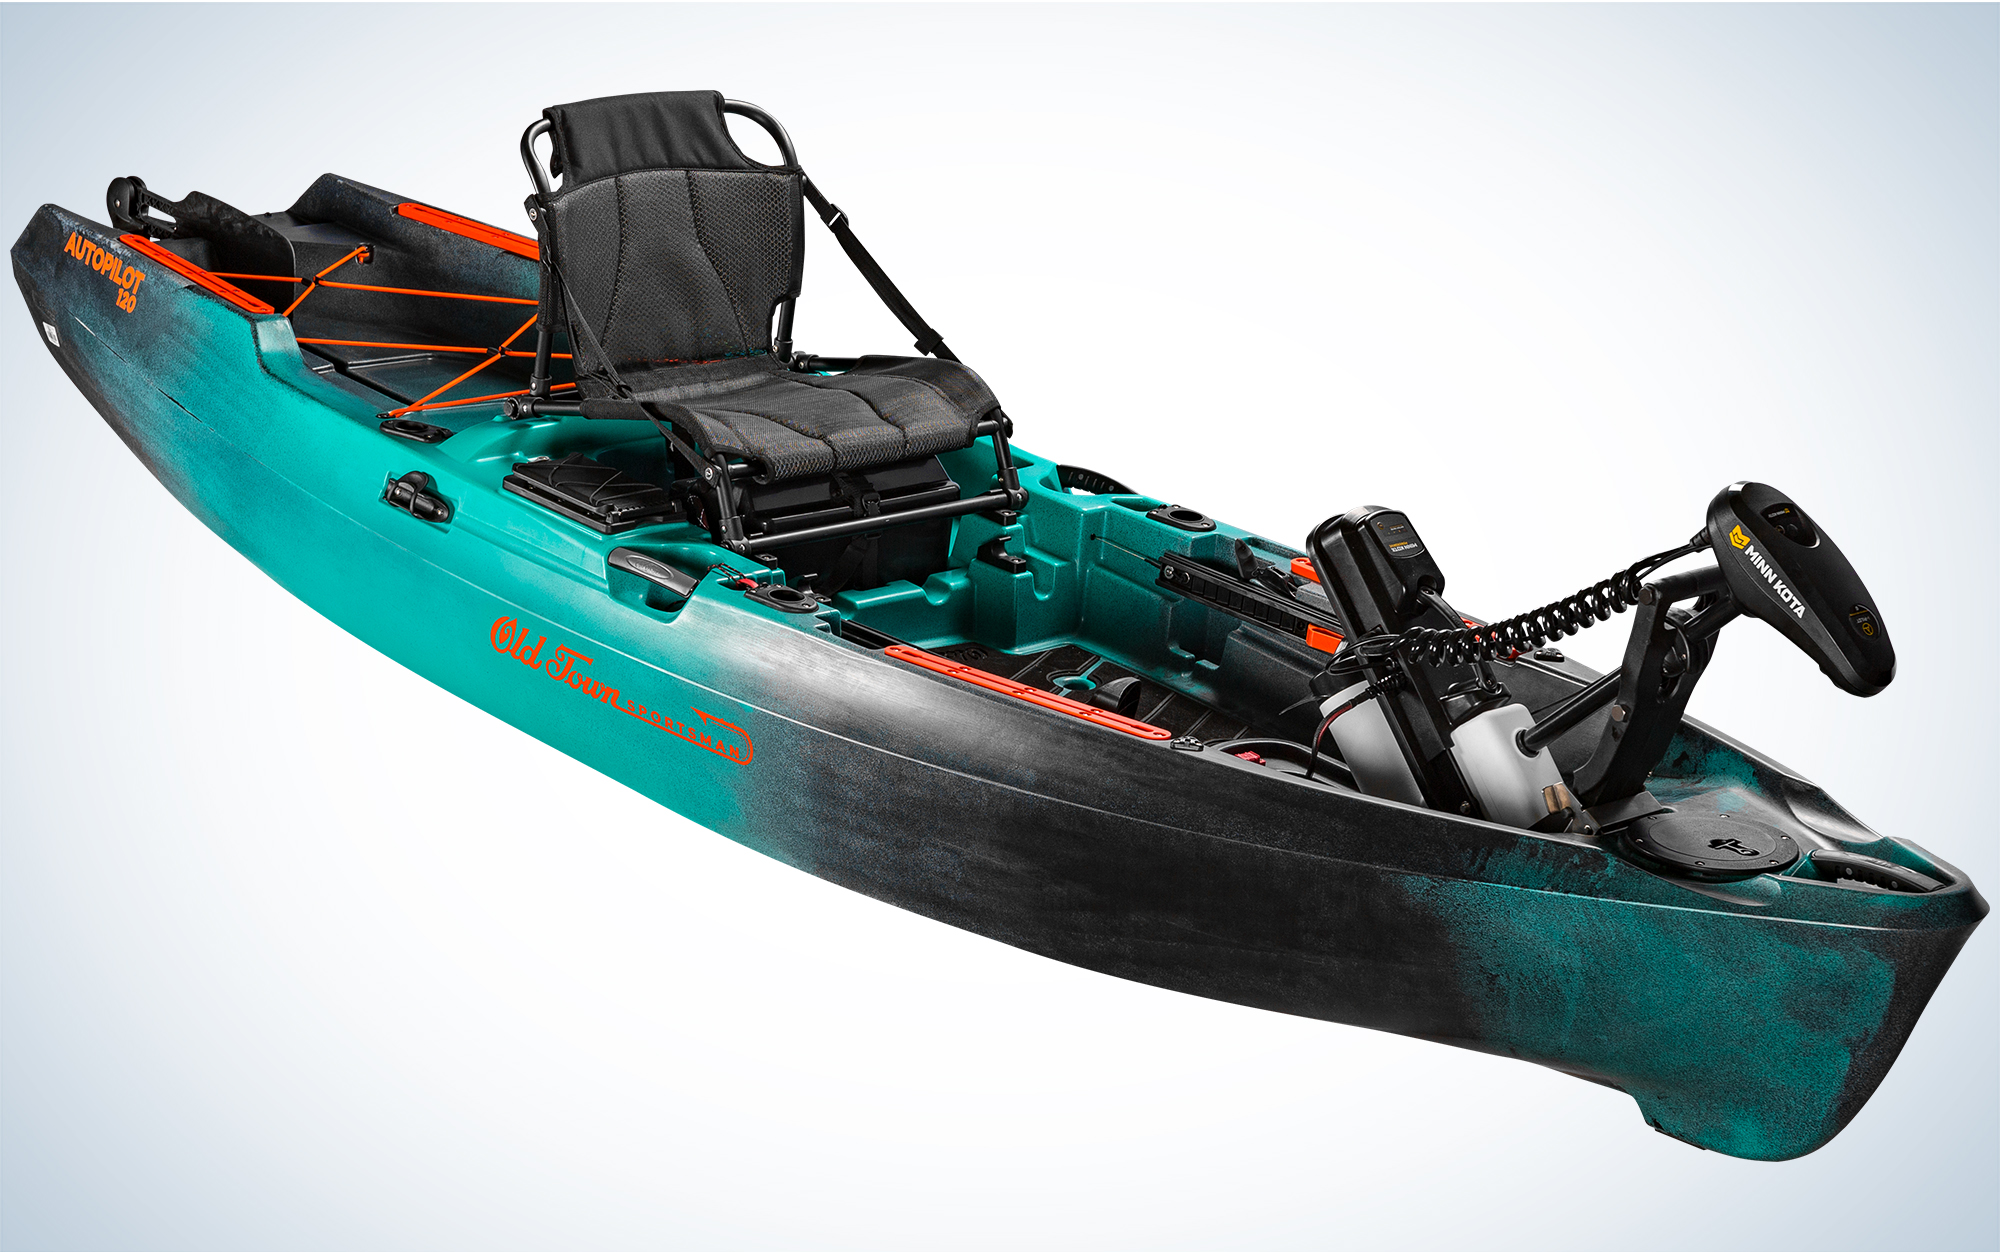 The Old Town Sportsman AutoPilot 120 is the ultimate fishing kayak.